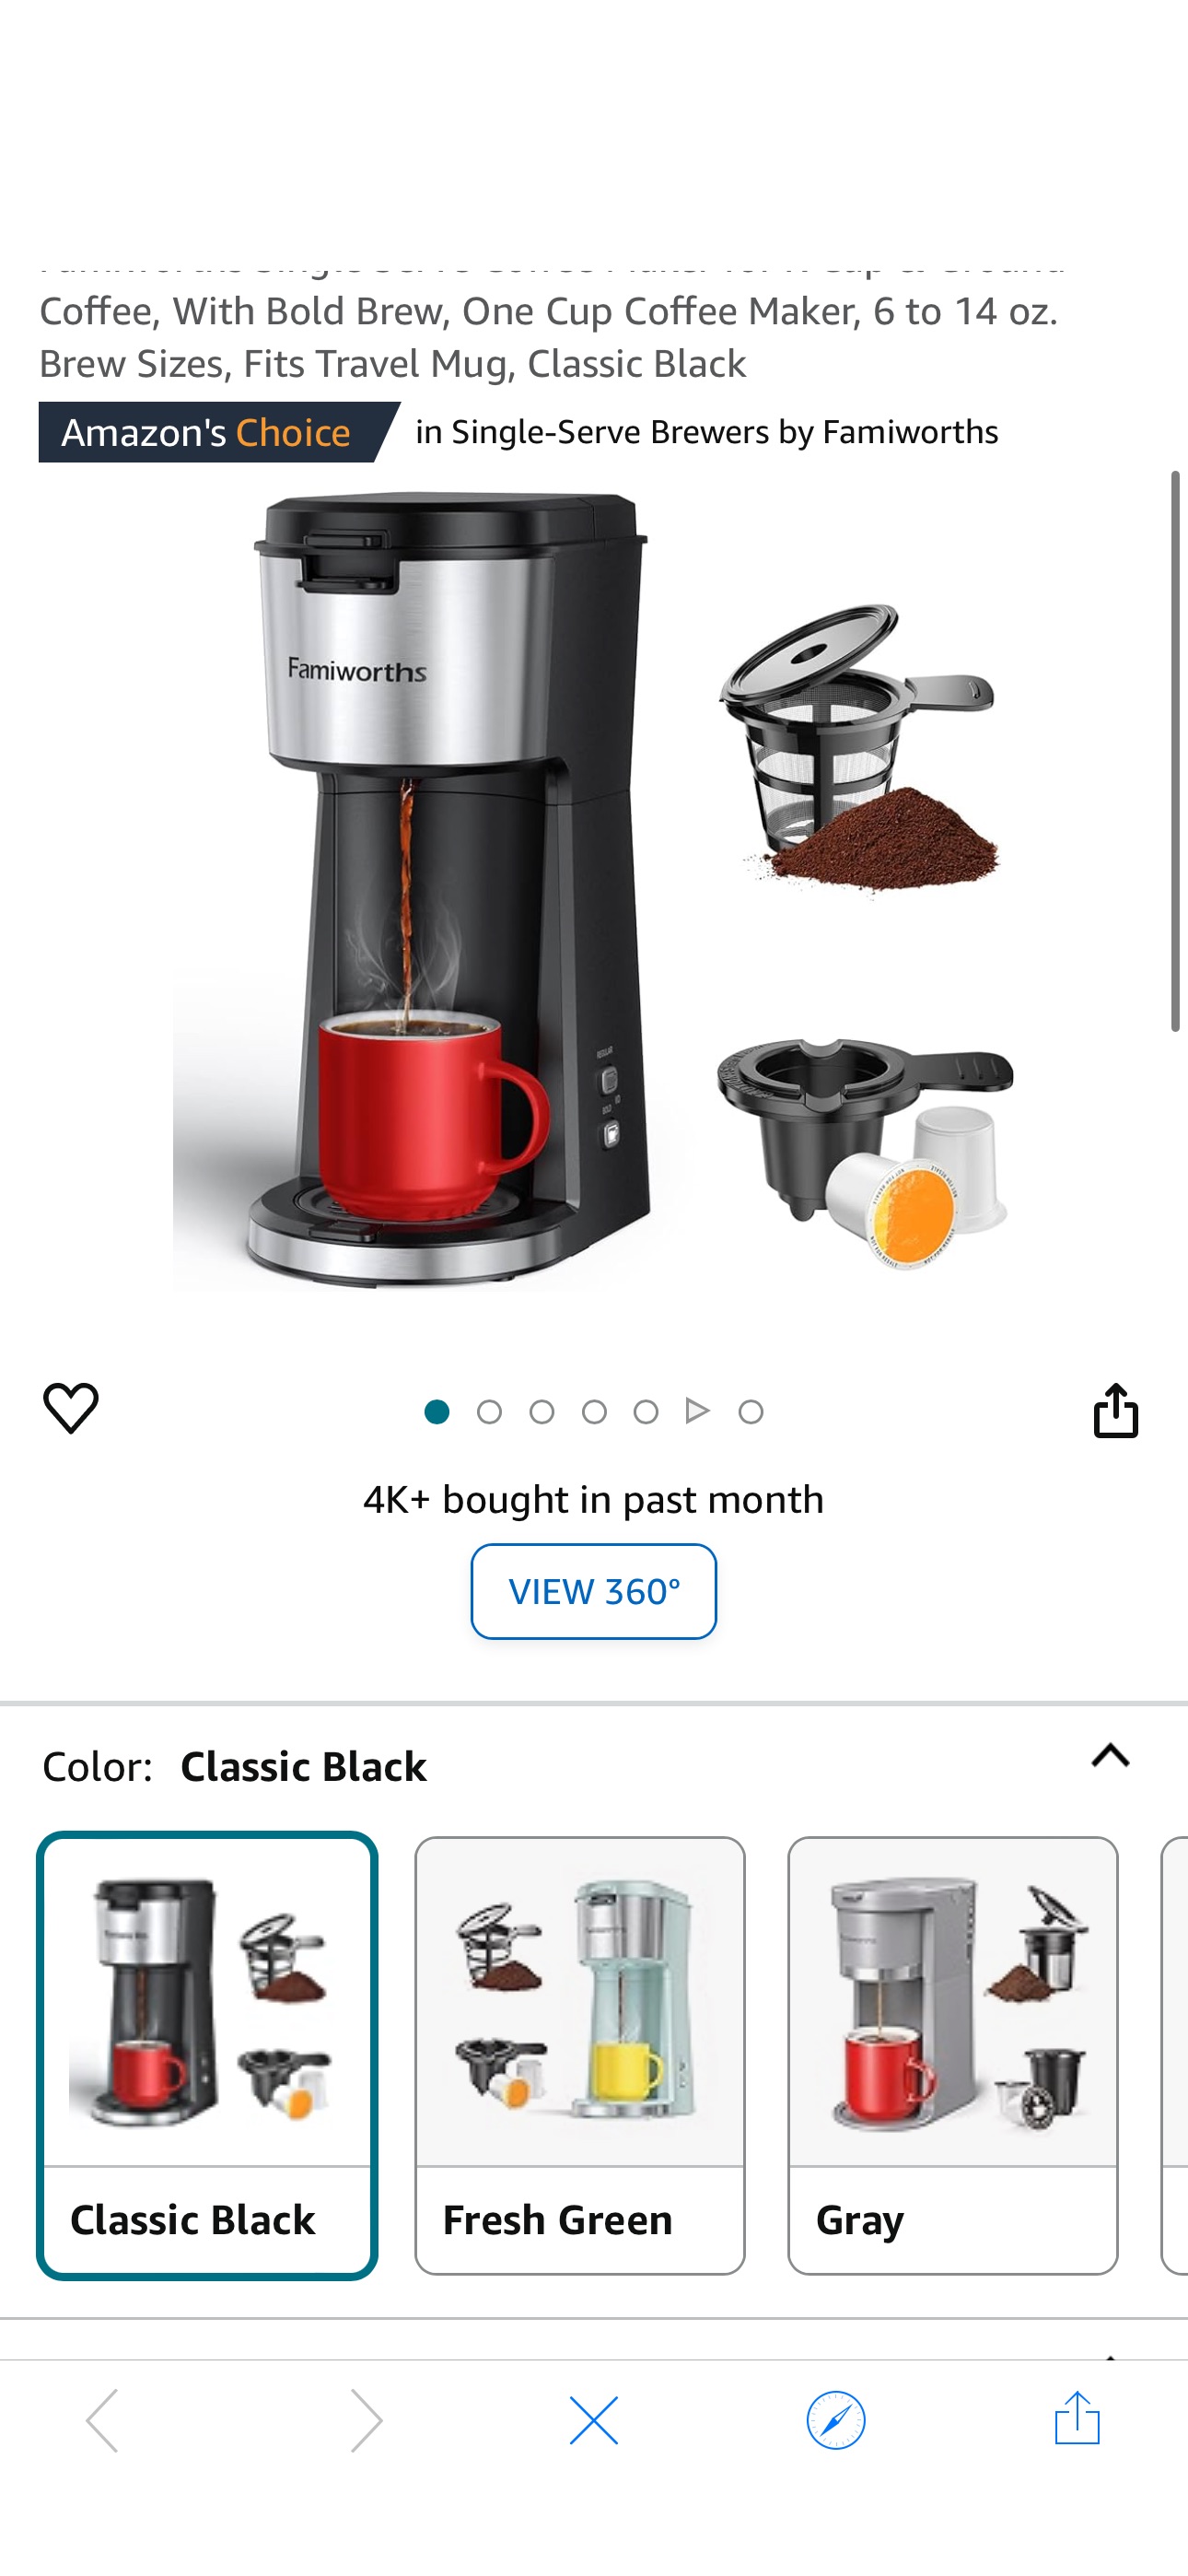 Amazon.com: Famiworths Single Serve Coffee Maker for K Cup & Ground Coffee, With Bold Brew, One Cup Coffee Maker, 6 to 14 oz. Brew Sizes, Fits Travel Mug, Classic Black: Home & Kitchen